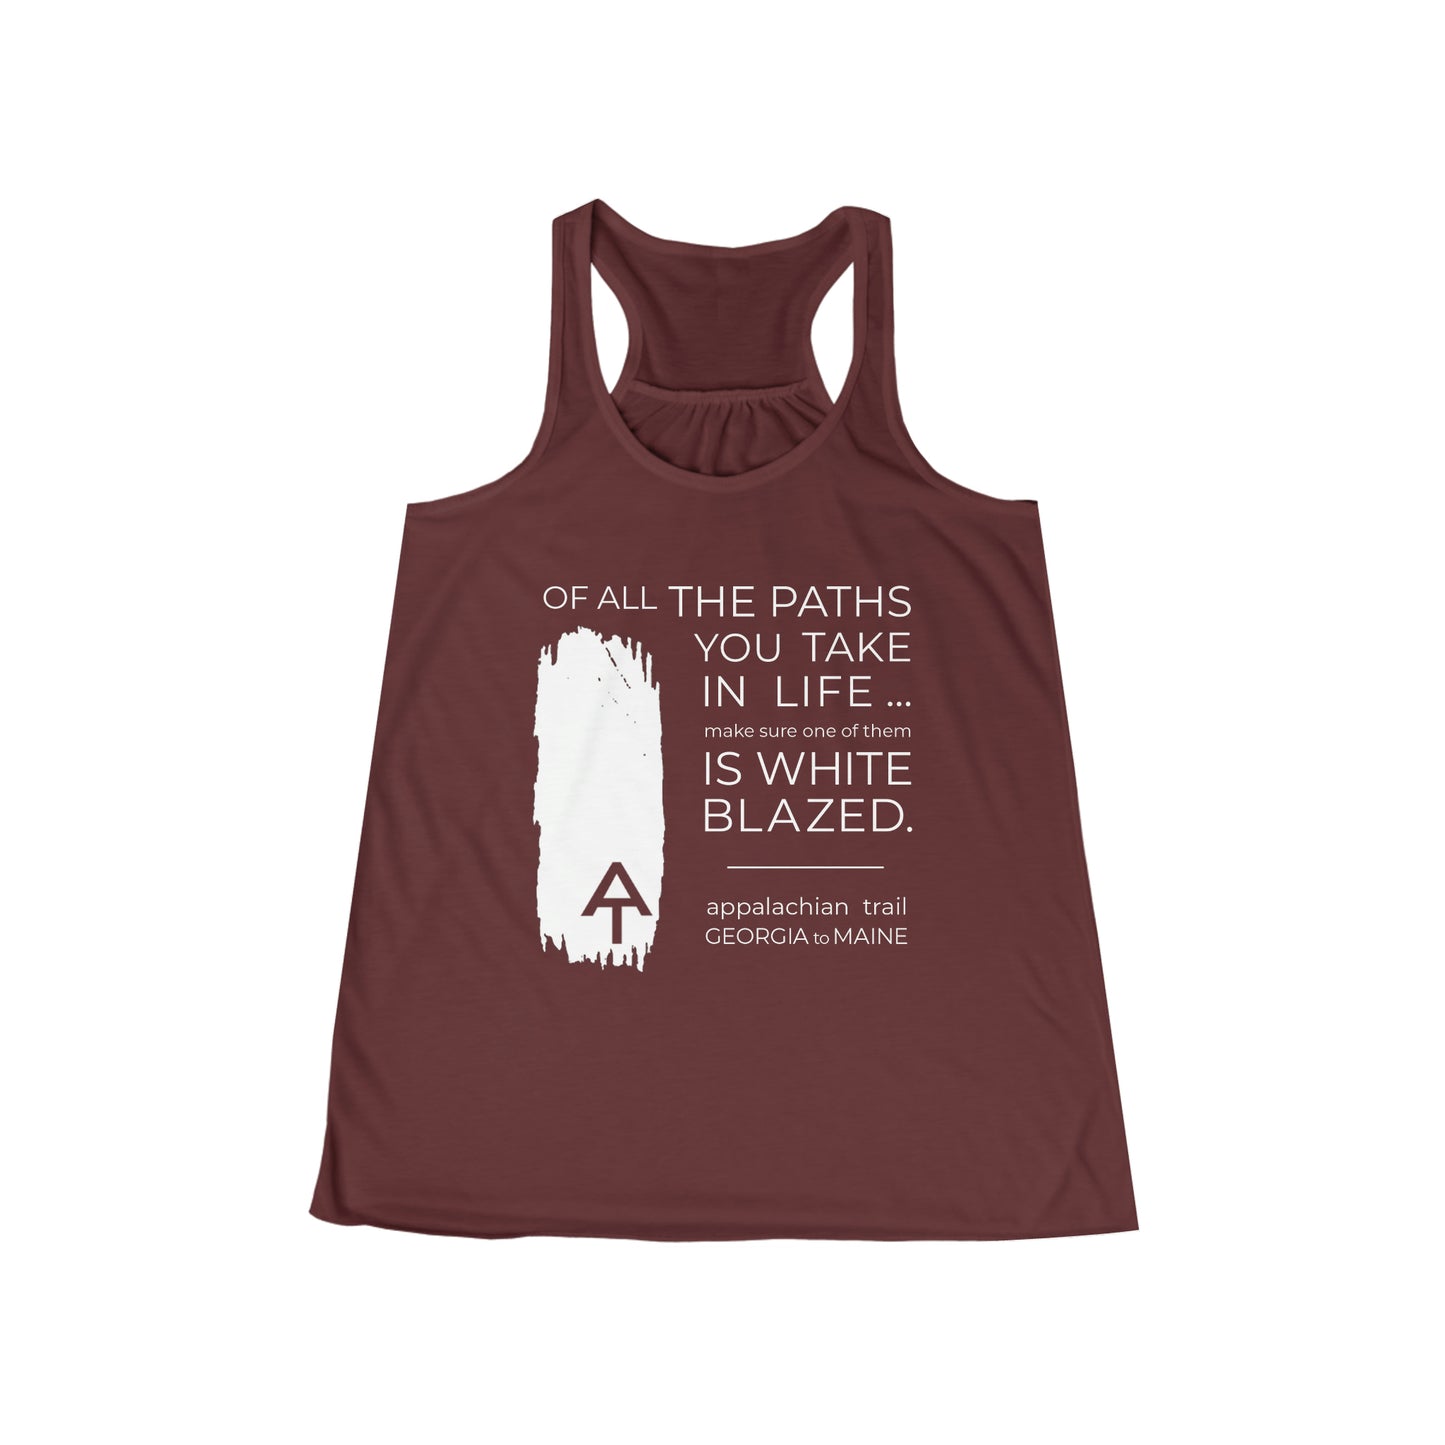 Of All the Paths AT - Women's Flowy Racerback Tank